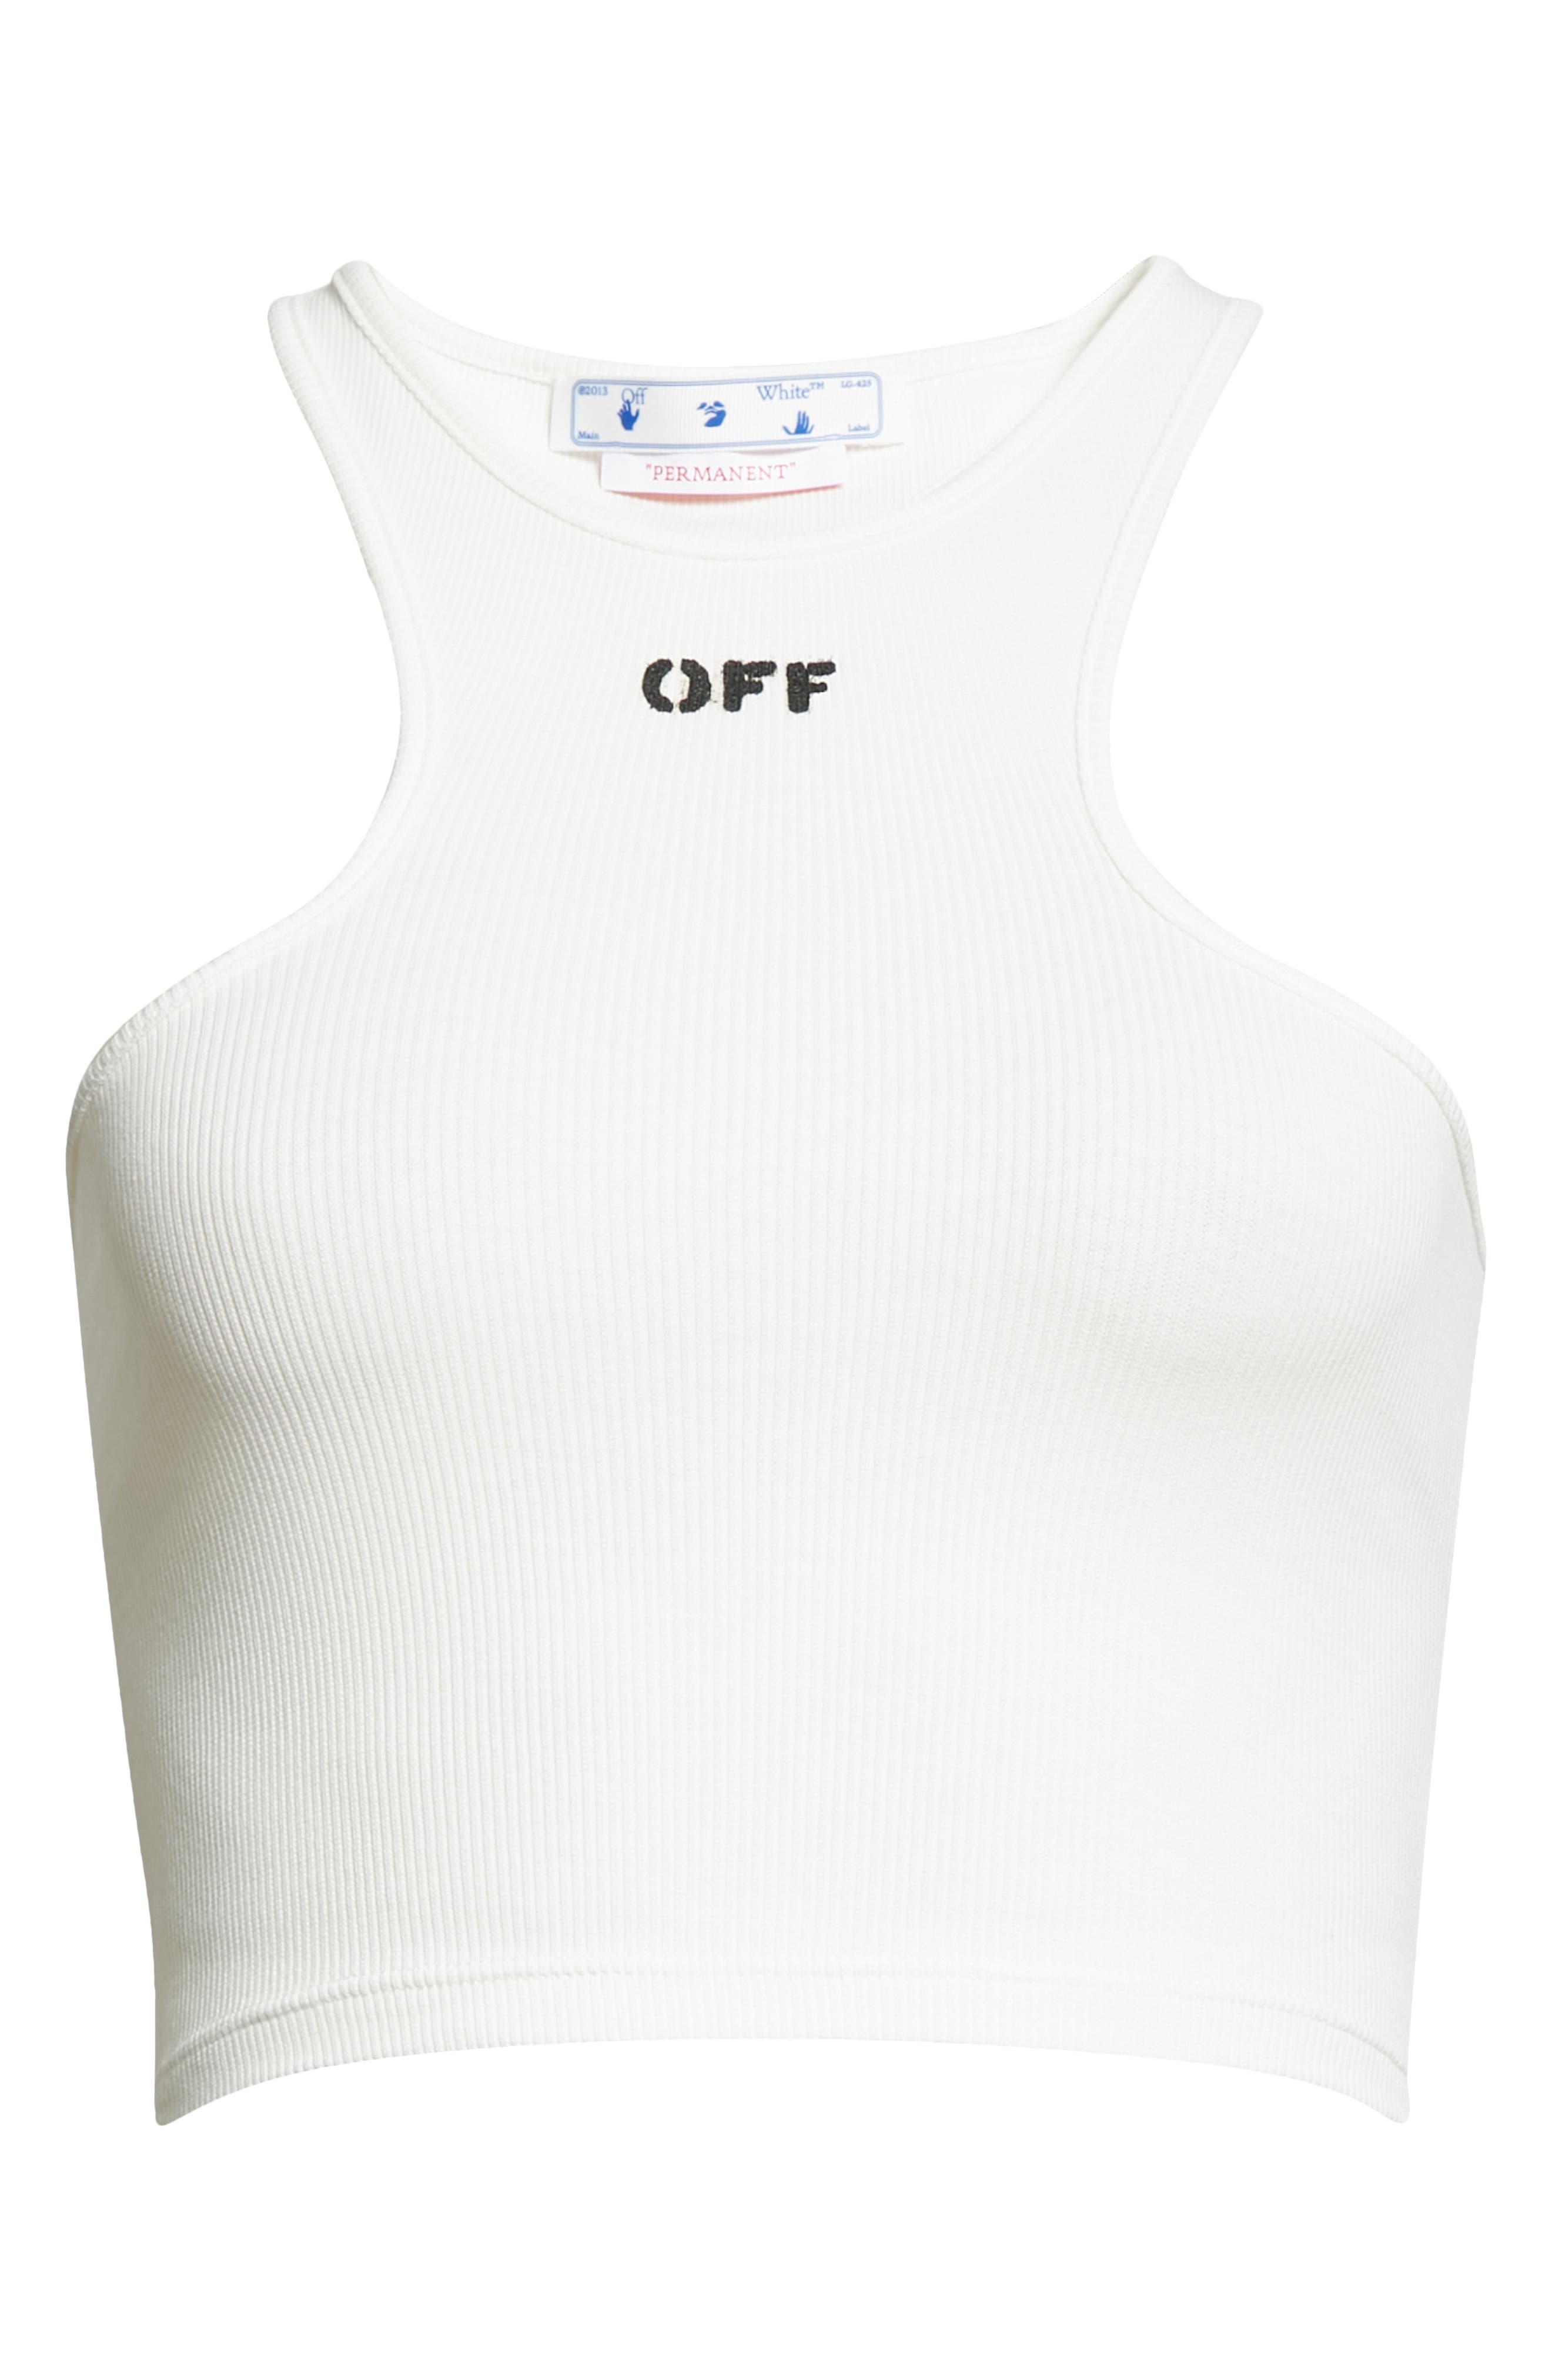 Off-White Off Stamp Rib Cotton Rowing Tank in White Black at Nordstrom